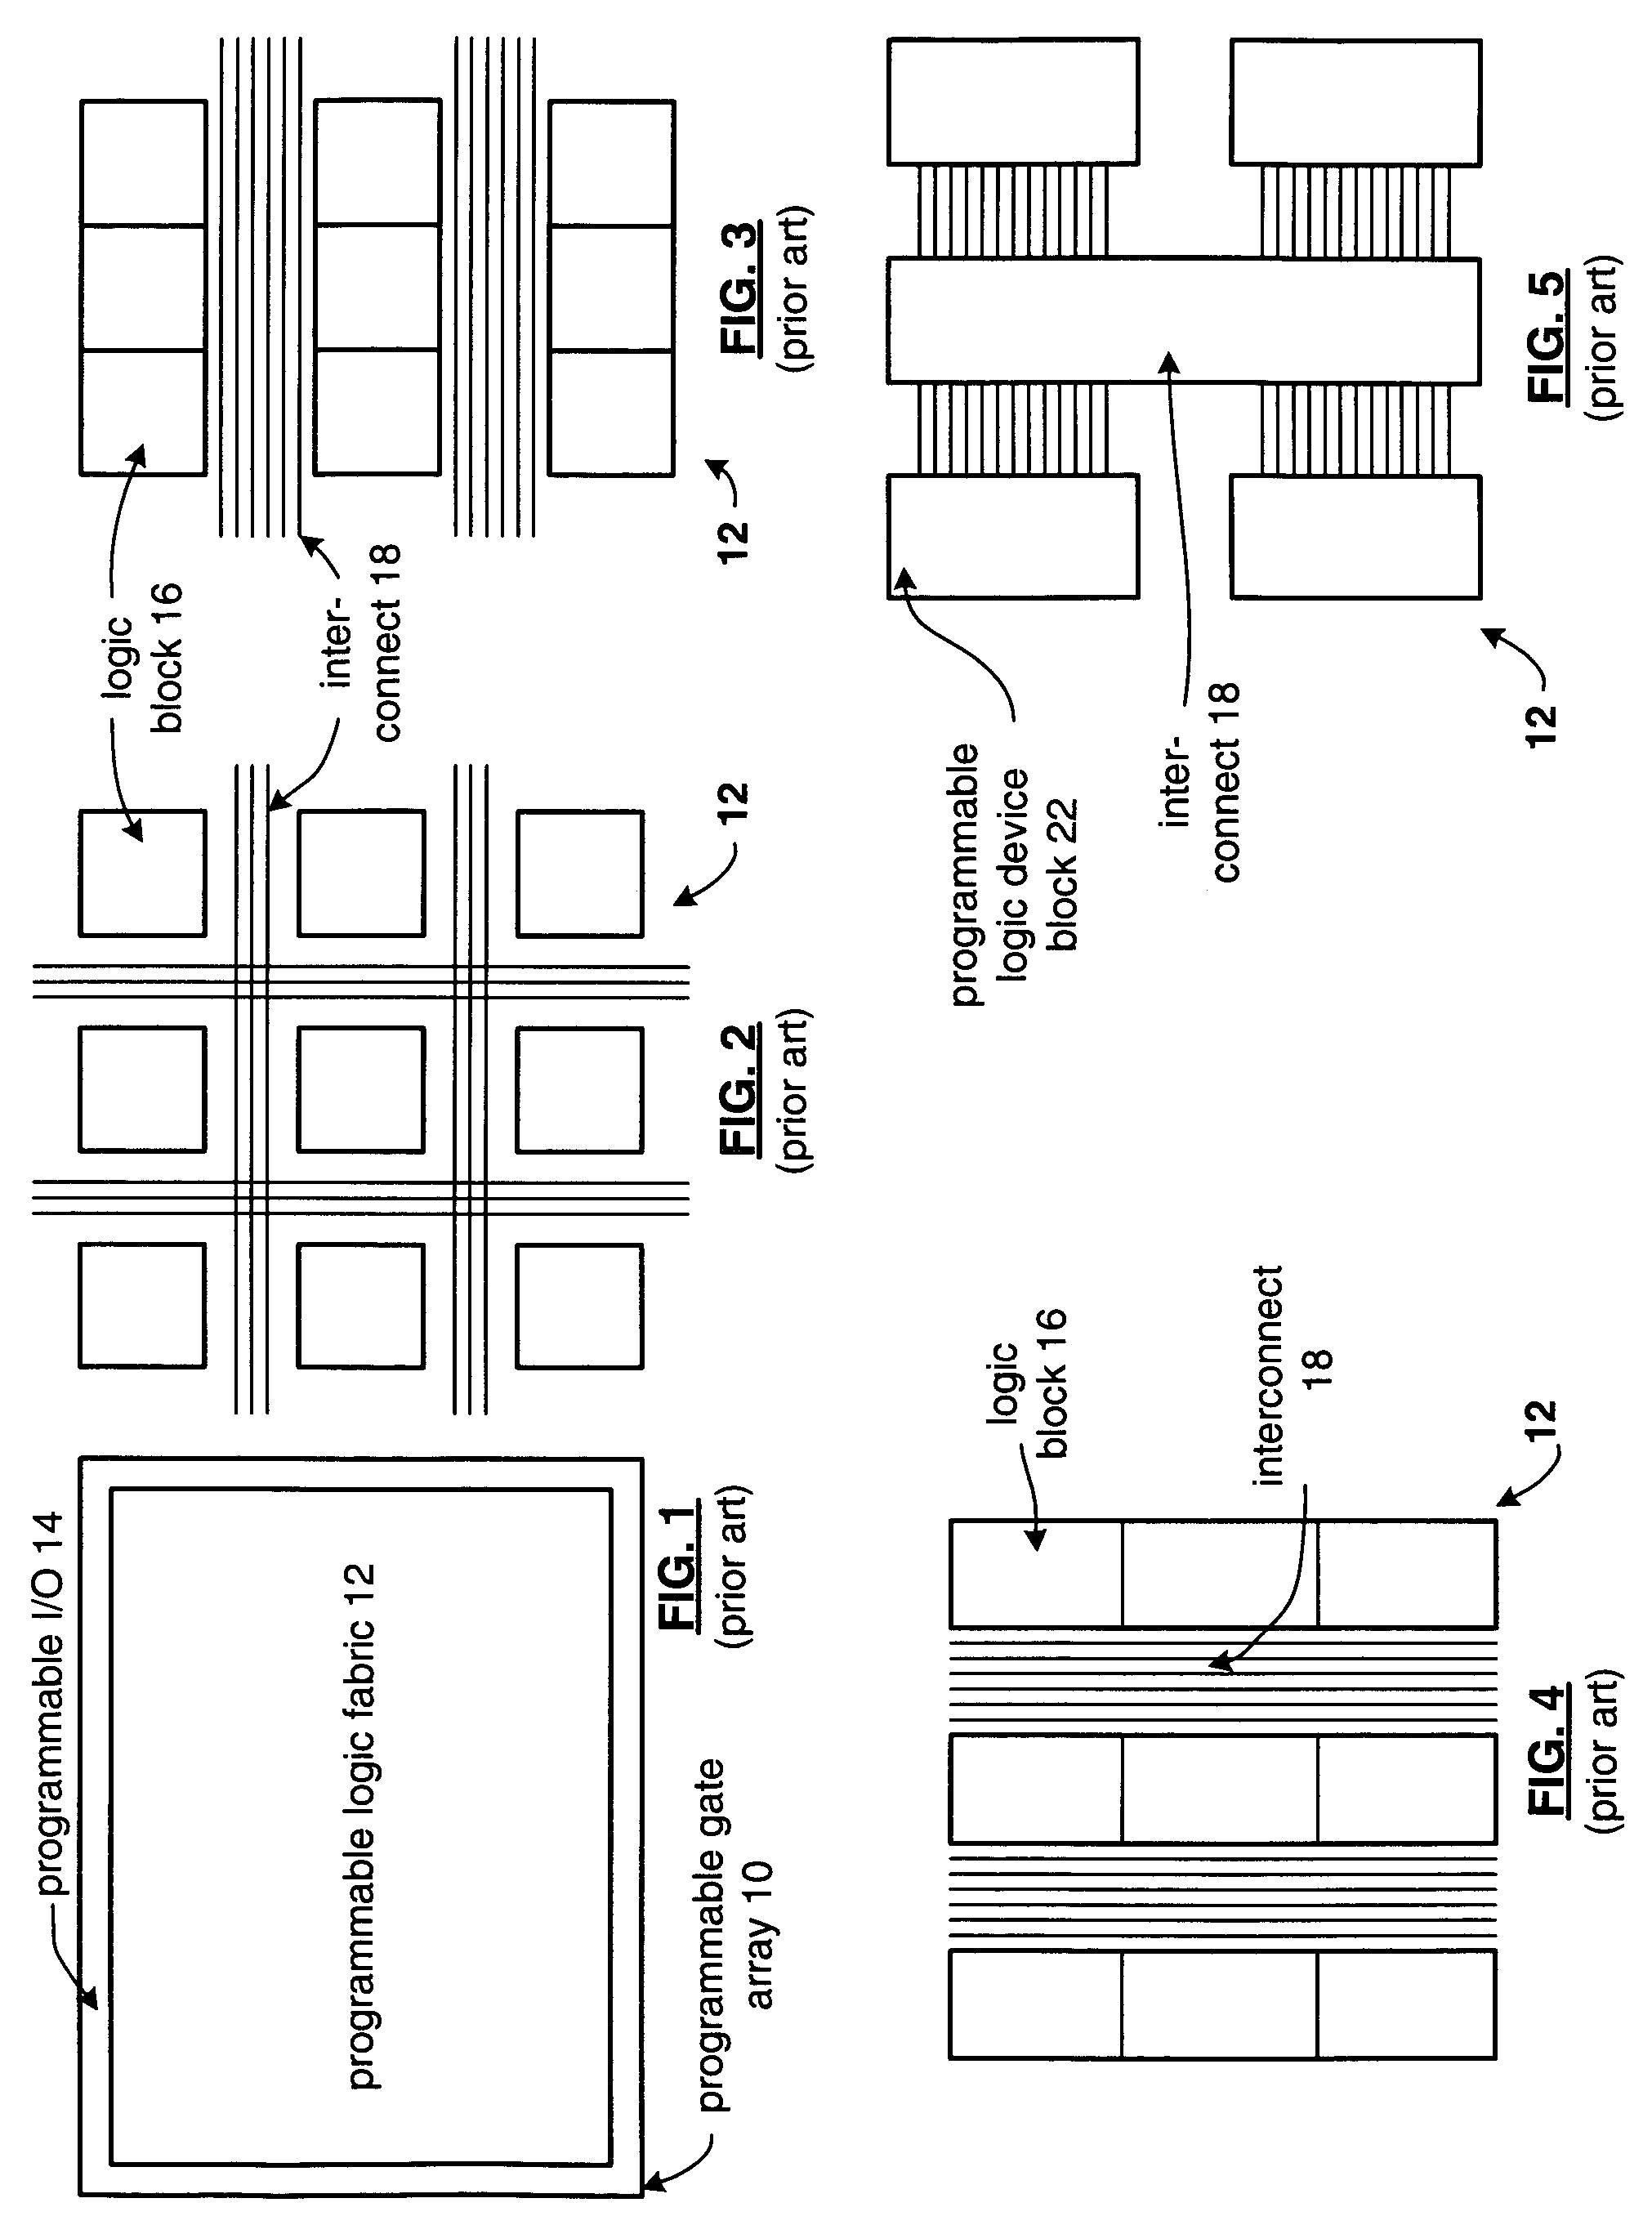 Programmable gate array and embedded circuitry initialization and processing